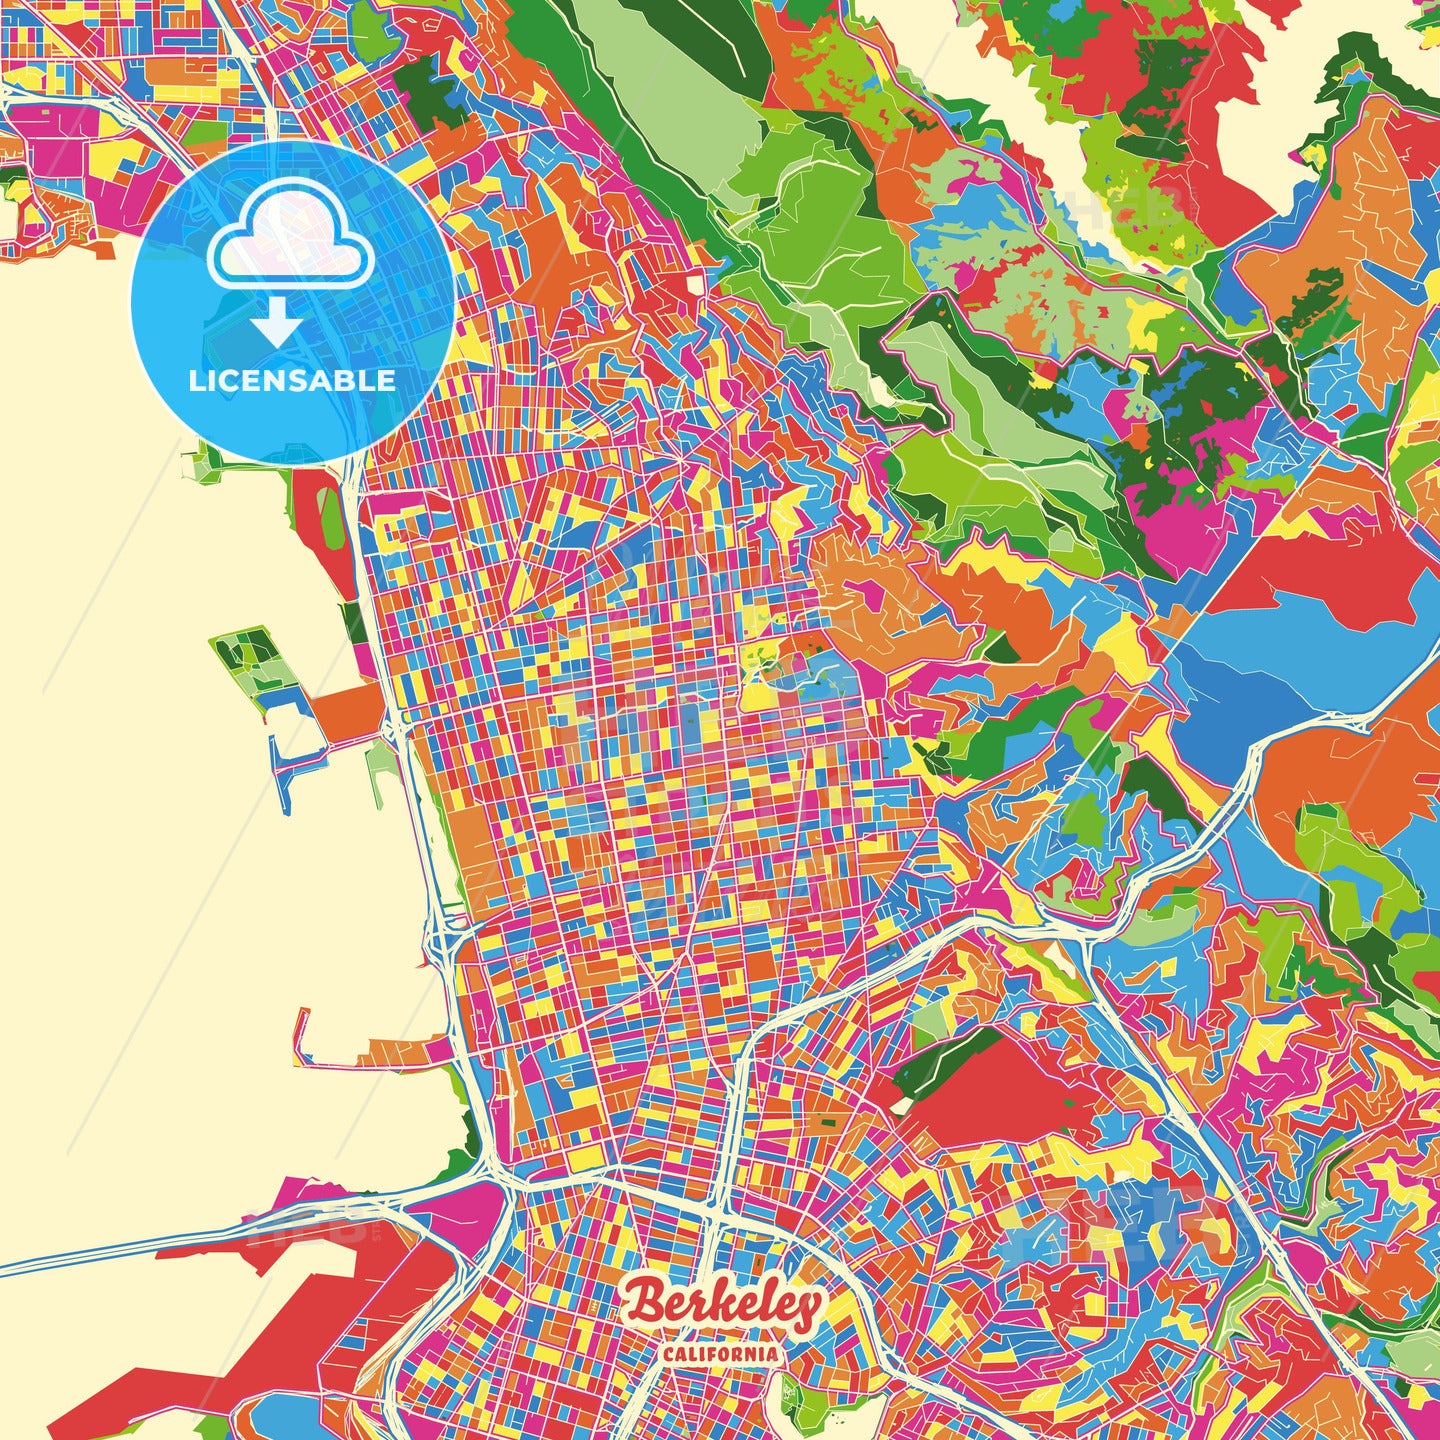 Berkeley, United States Crazy Colorful Street Map Poster Template - HEBSTREITS Sketches